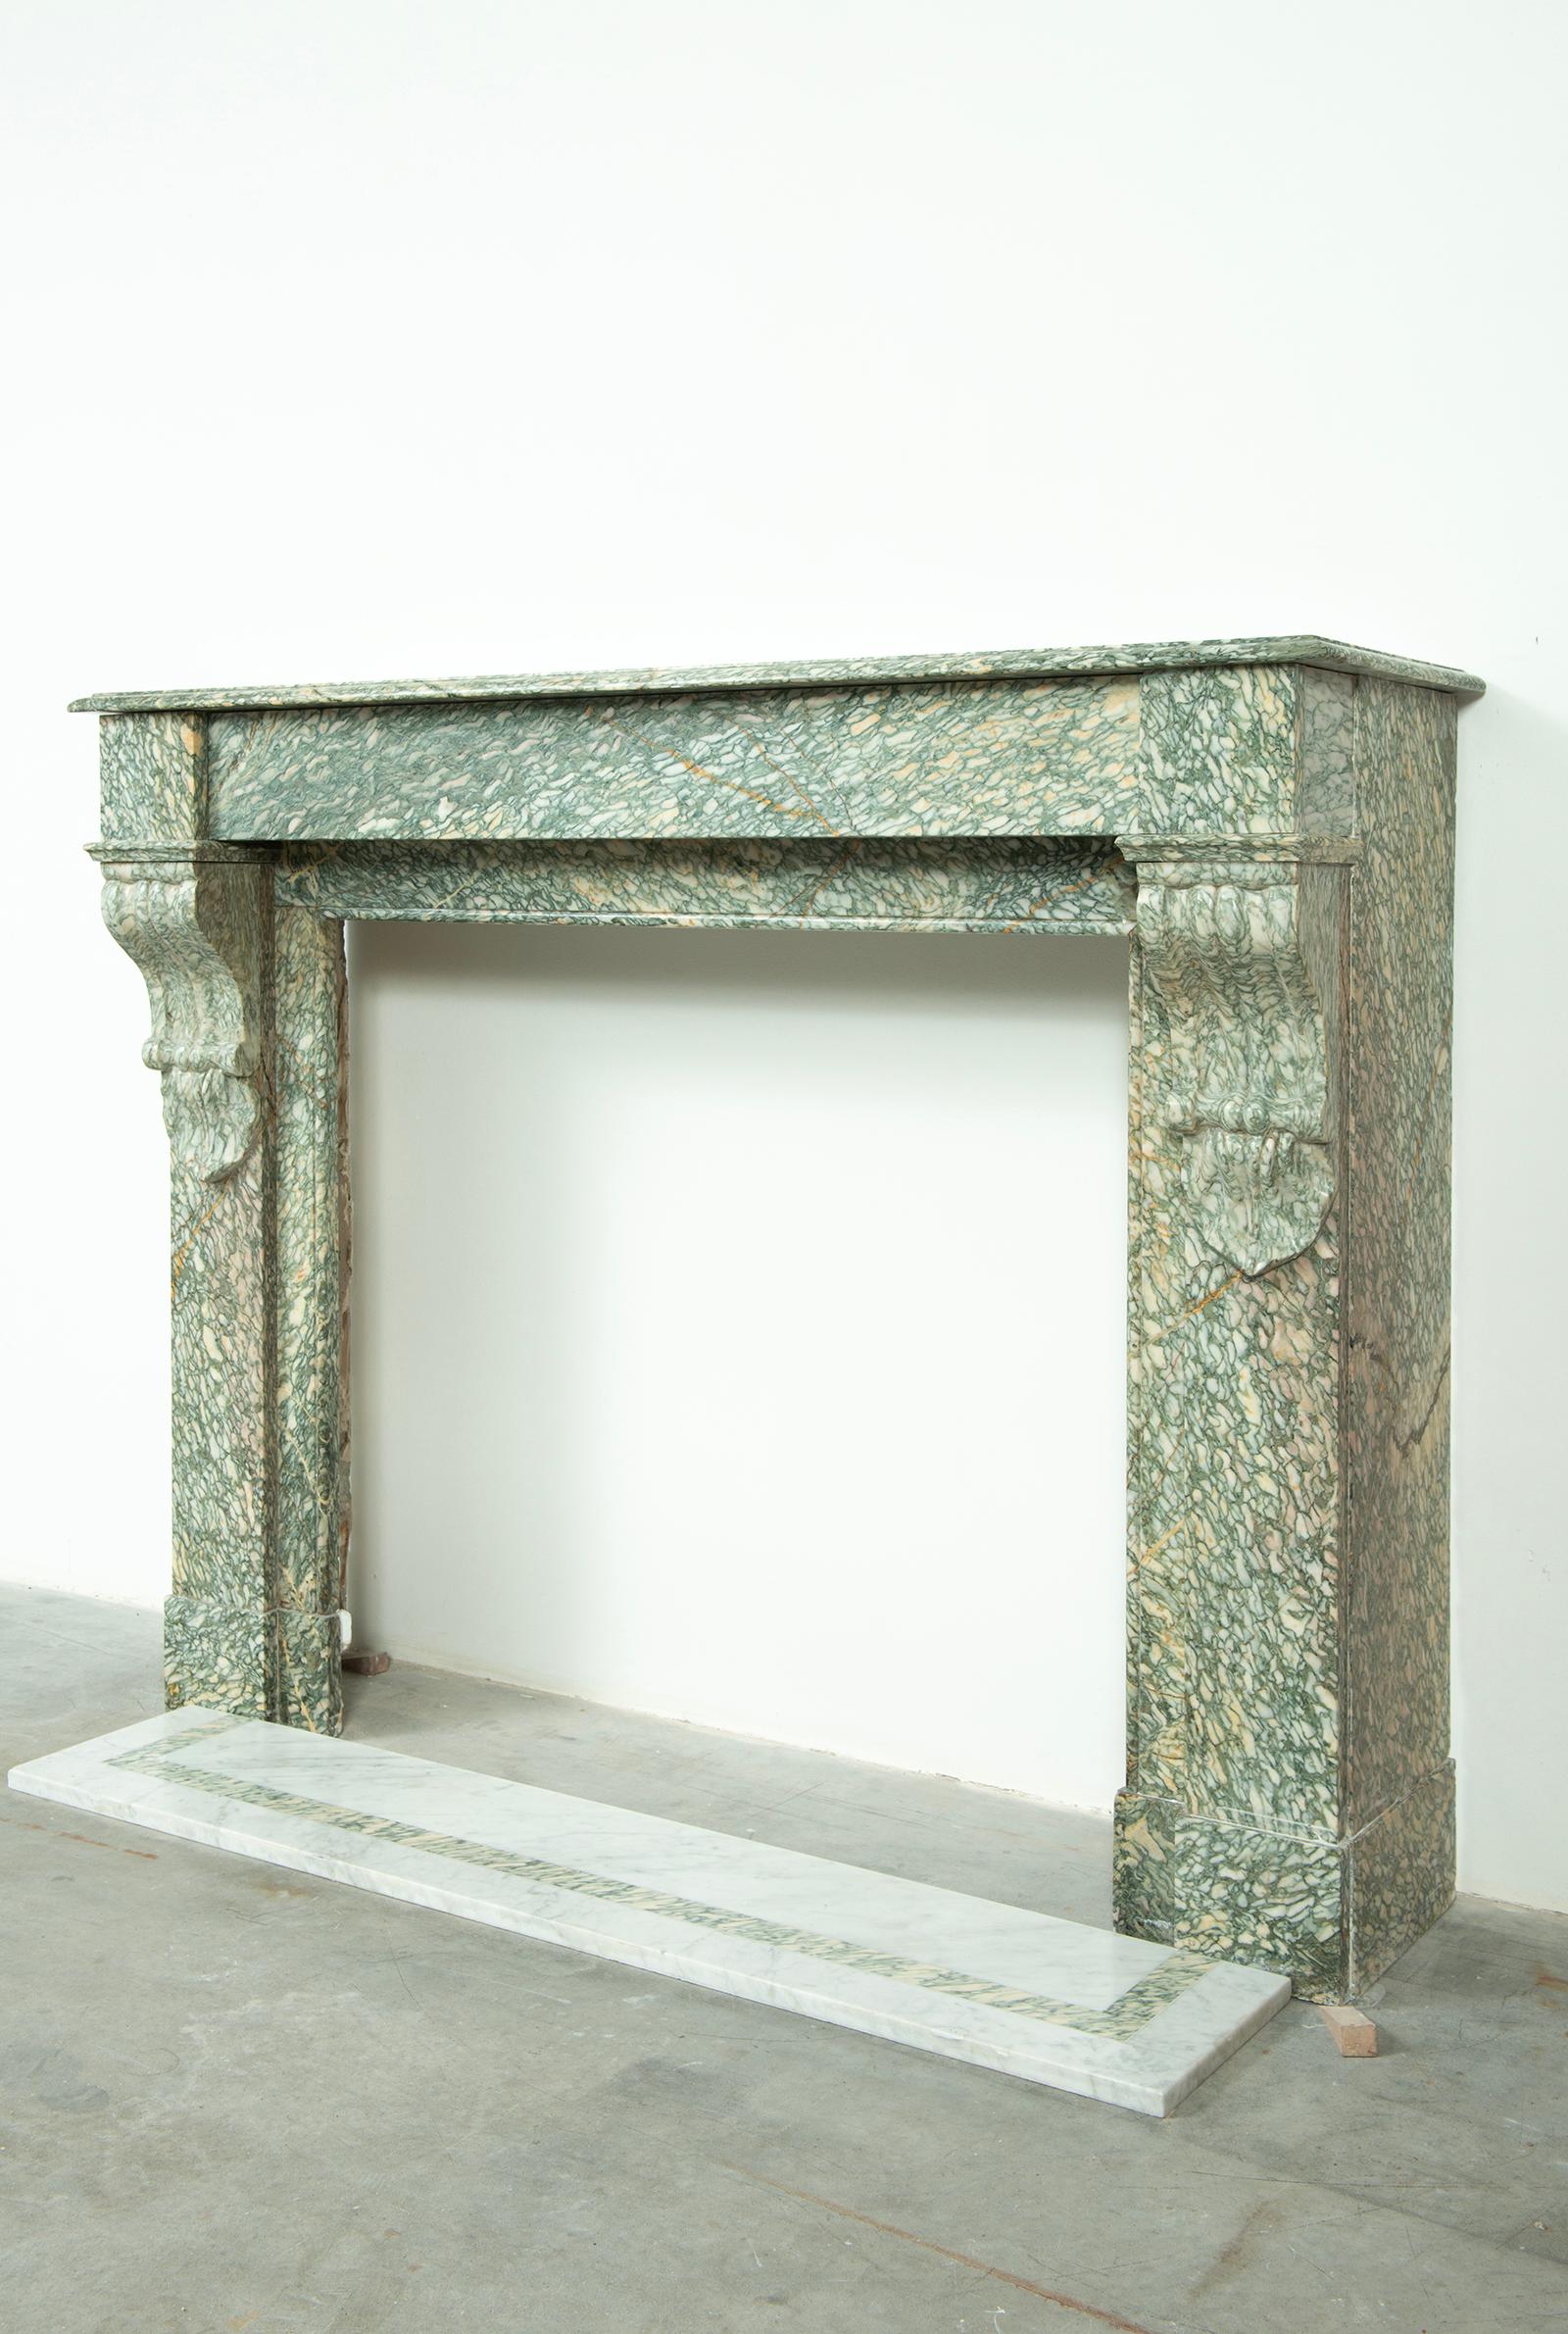 Lovely little French console fireplace in soft toned green and yellow Vert d' Estours marble.
This perfect sized mantel come with an white marble front floor with green marble inlay, beautiful piece.

This mantel is in great condition, ready to